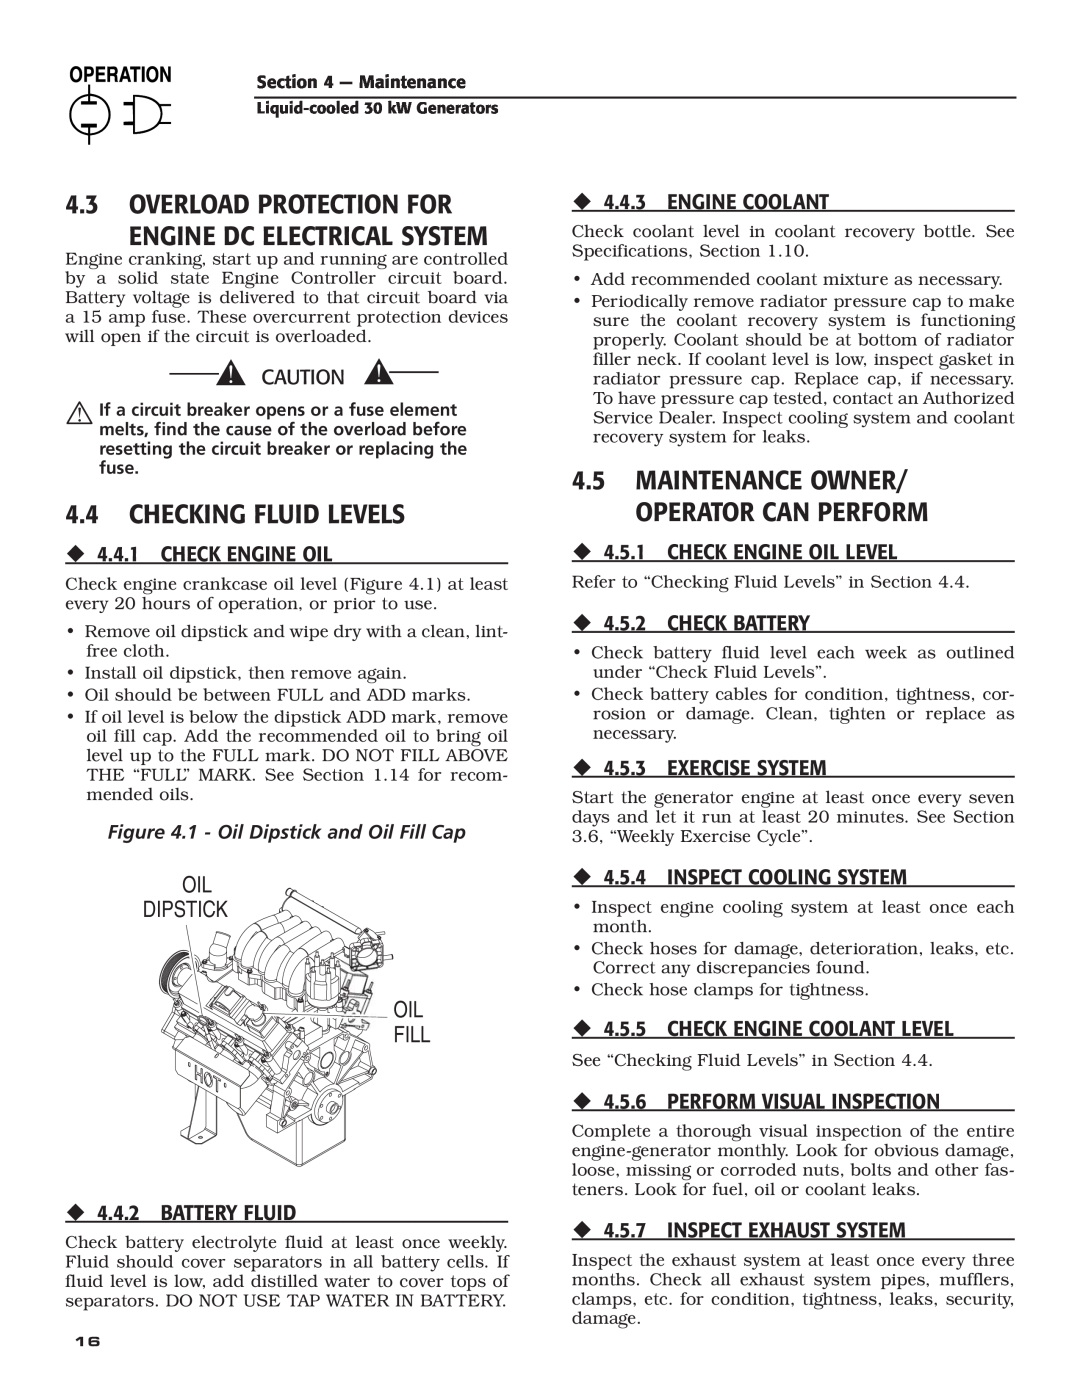 Generac Power Systems 004988-4 owner manual Overload Protection For Engine Dc Electrical System, Checking Fluid Levels 